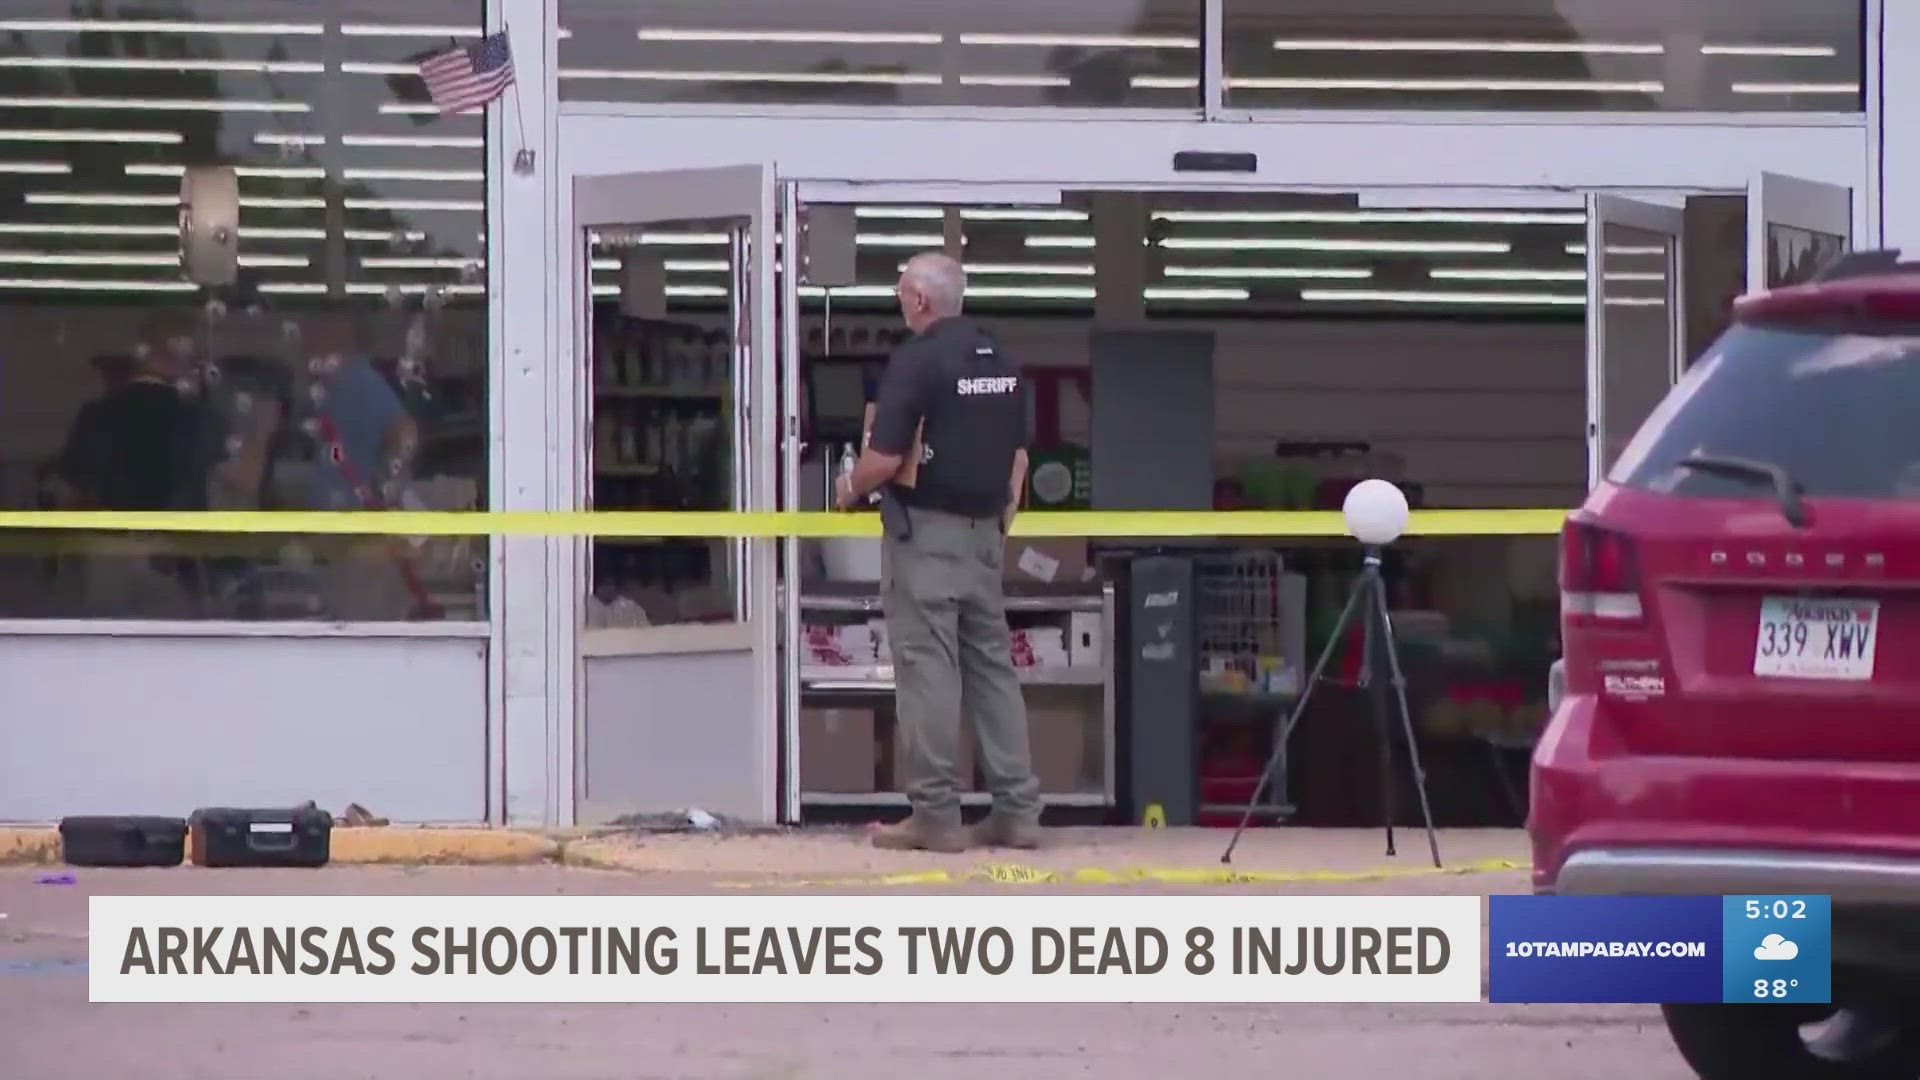 Arkansas State Police have confirmed that 2 people have died and multiple others were shot during an incident at a Fordyce grocery store on Friday.